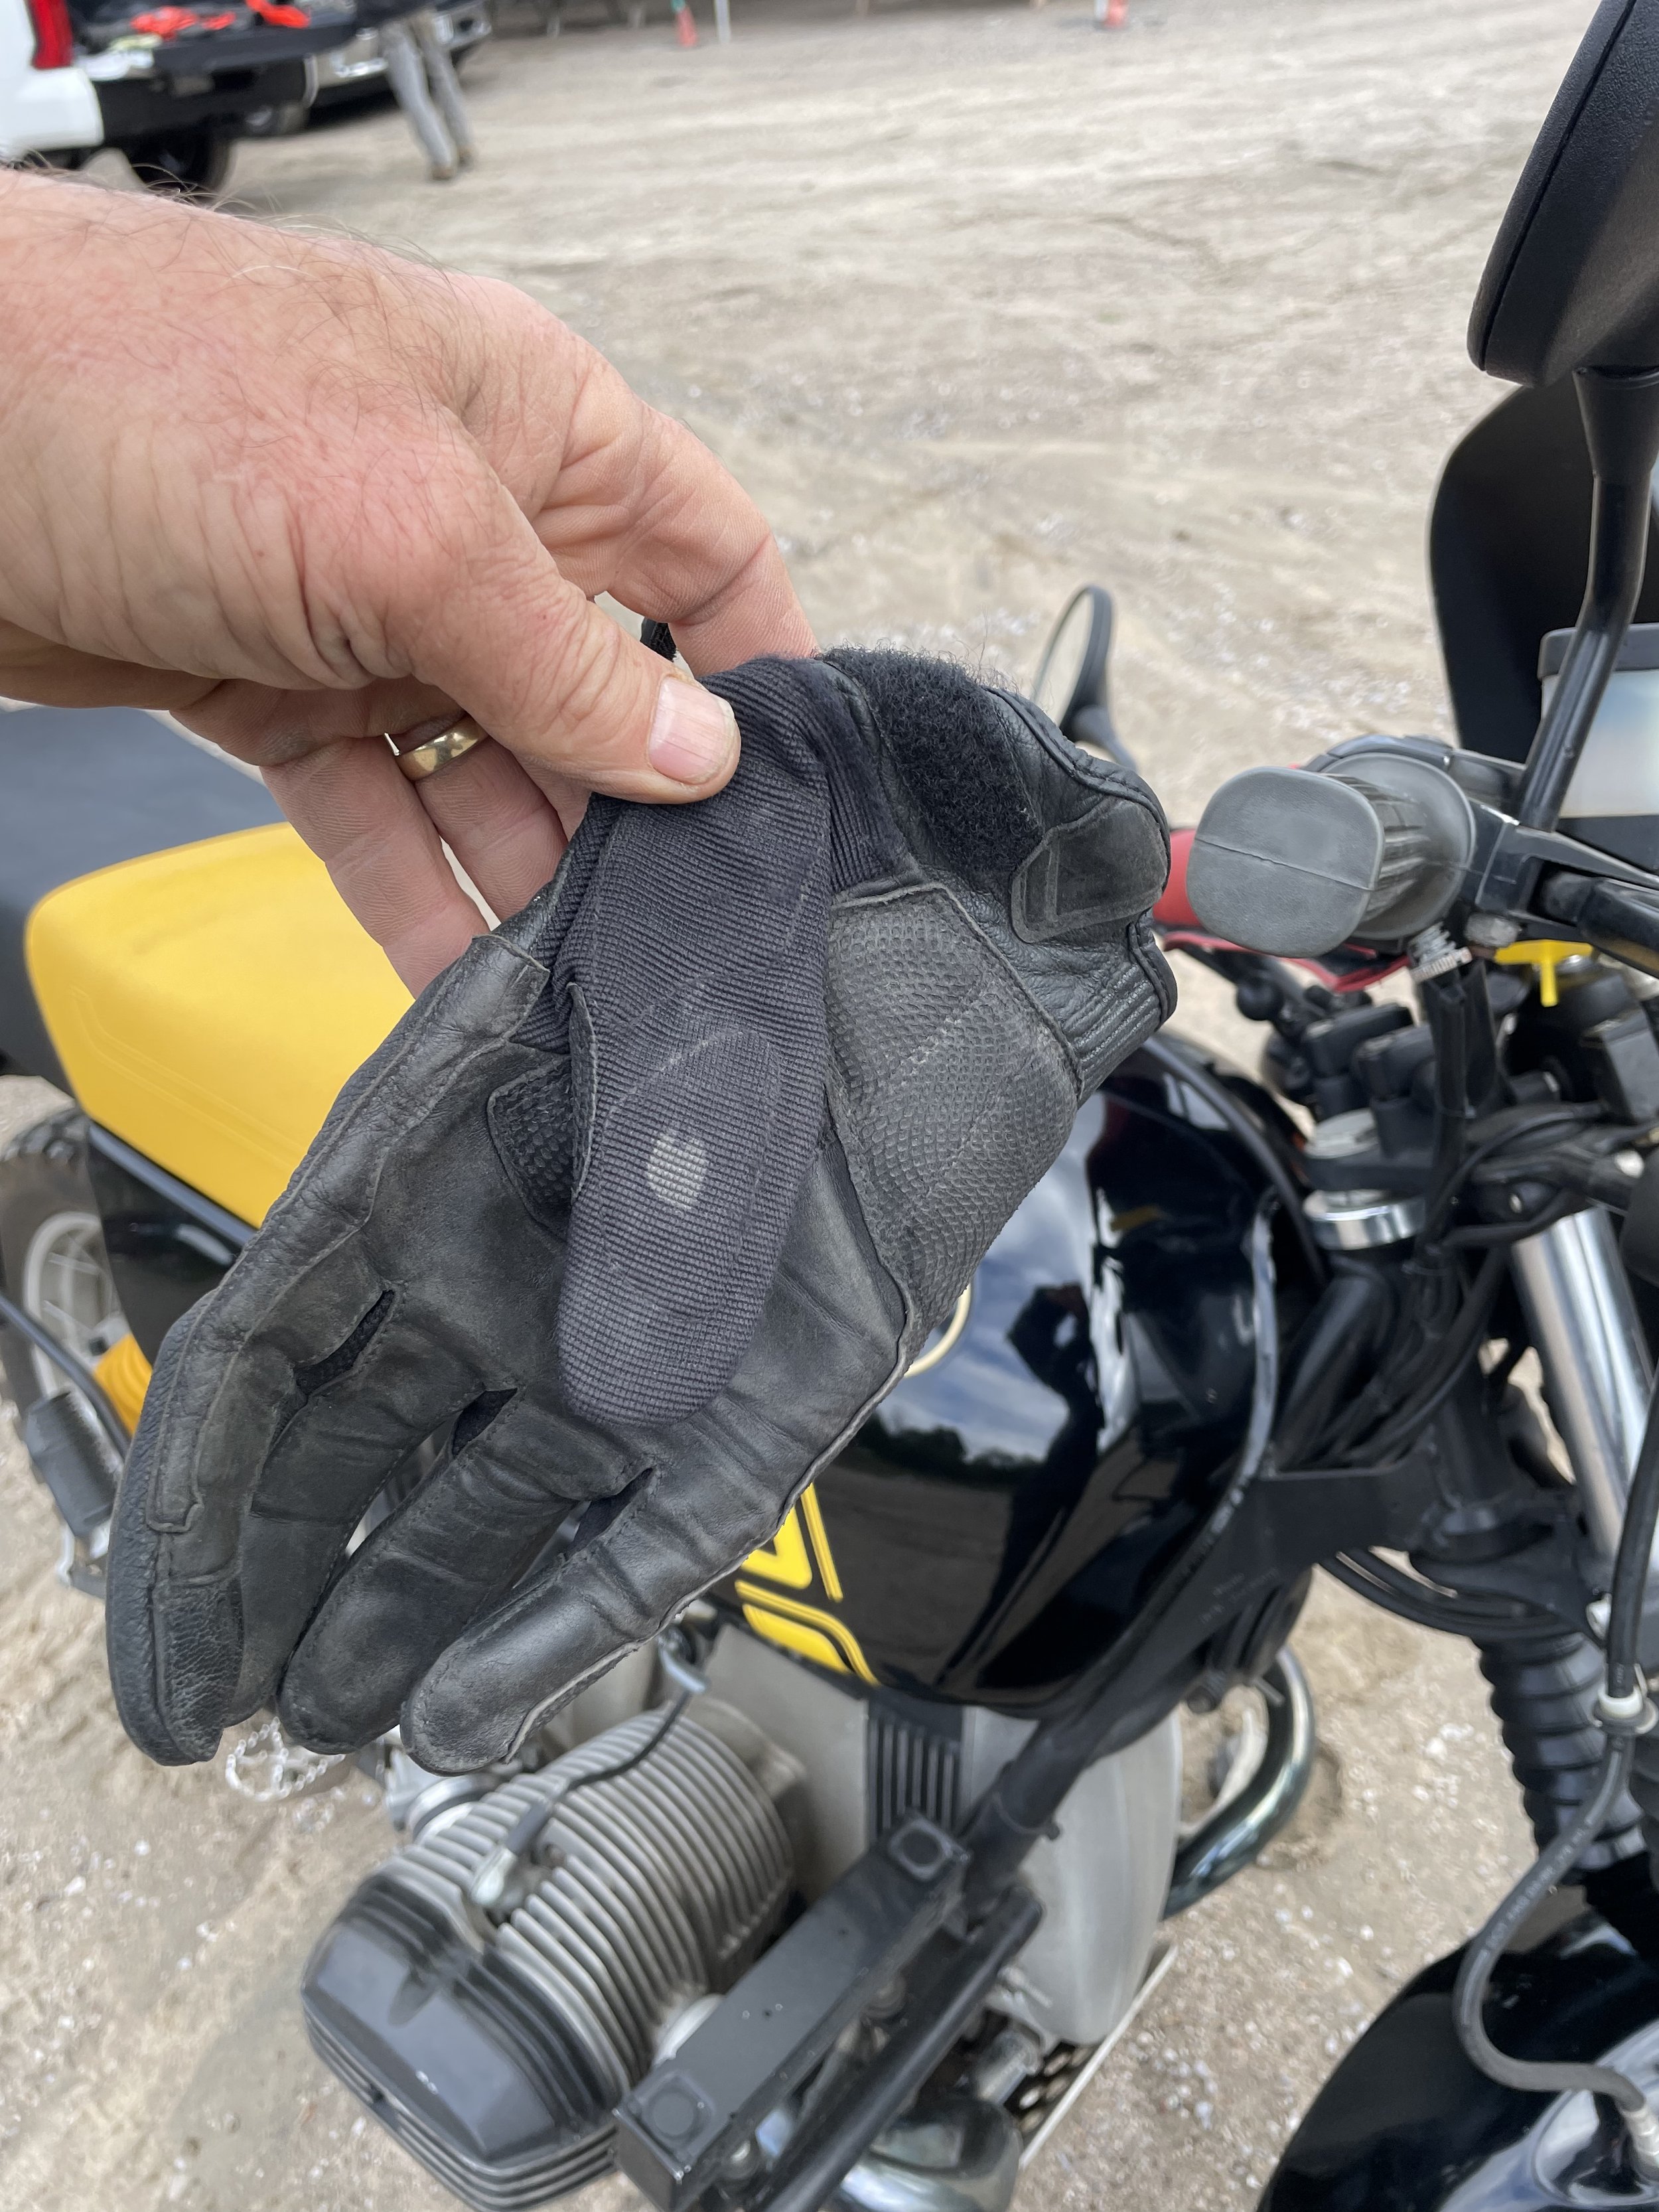  Motorcycle and motorcycle glove. 